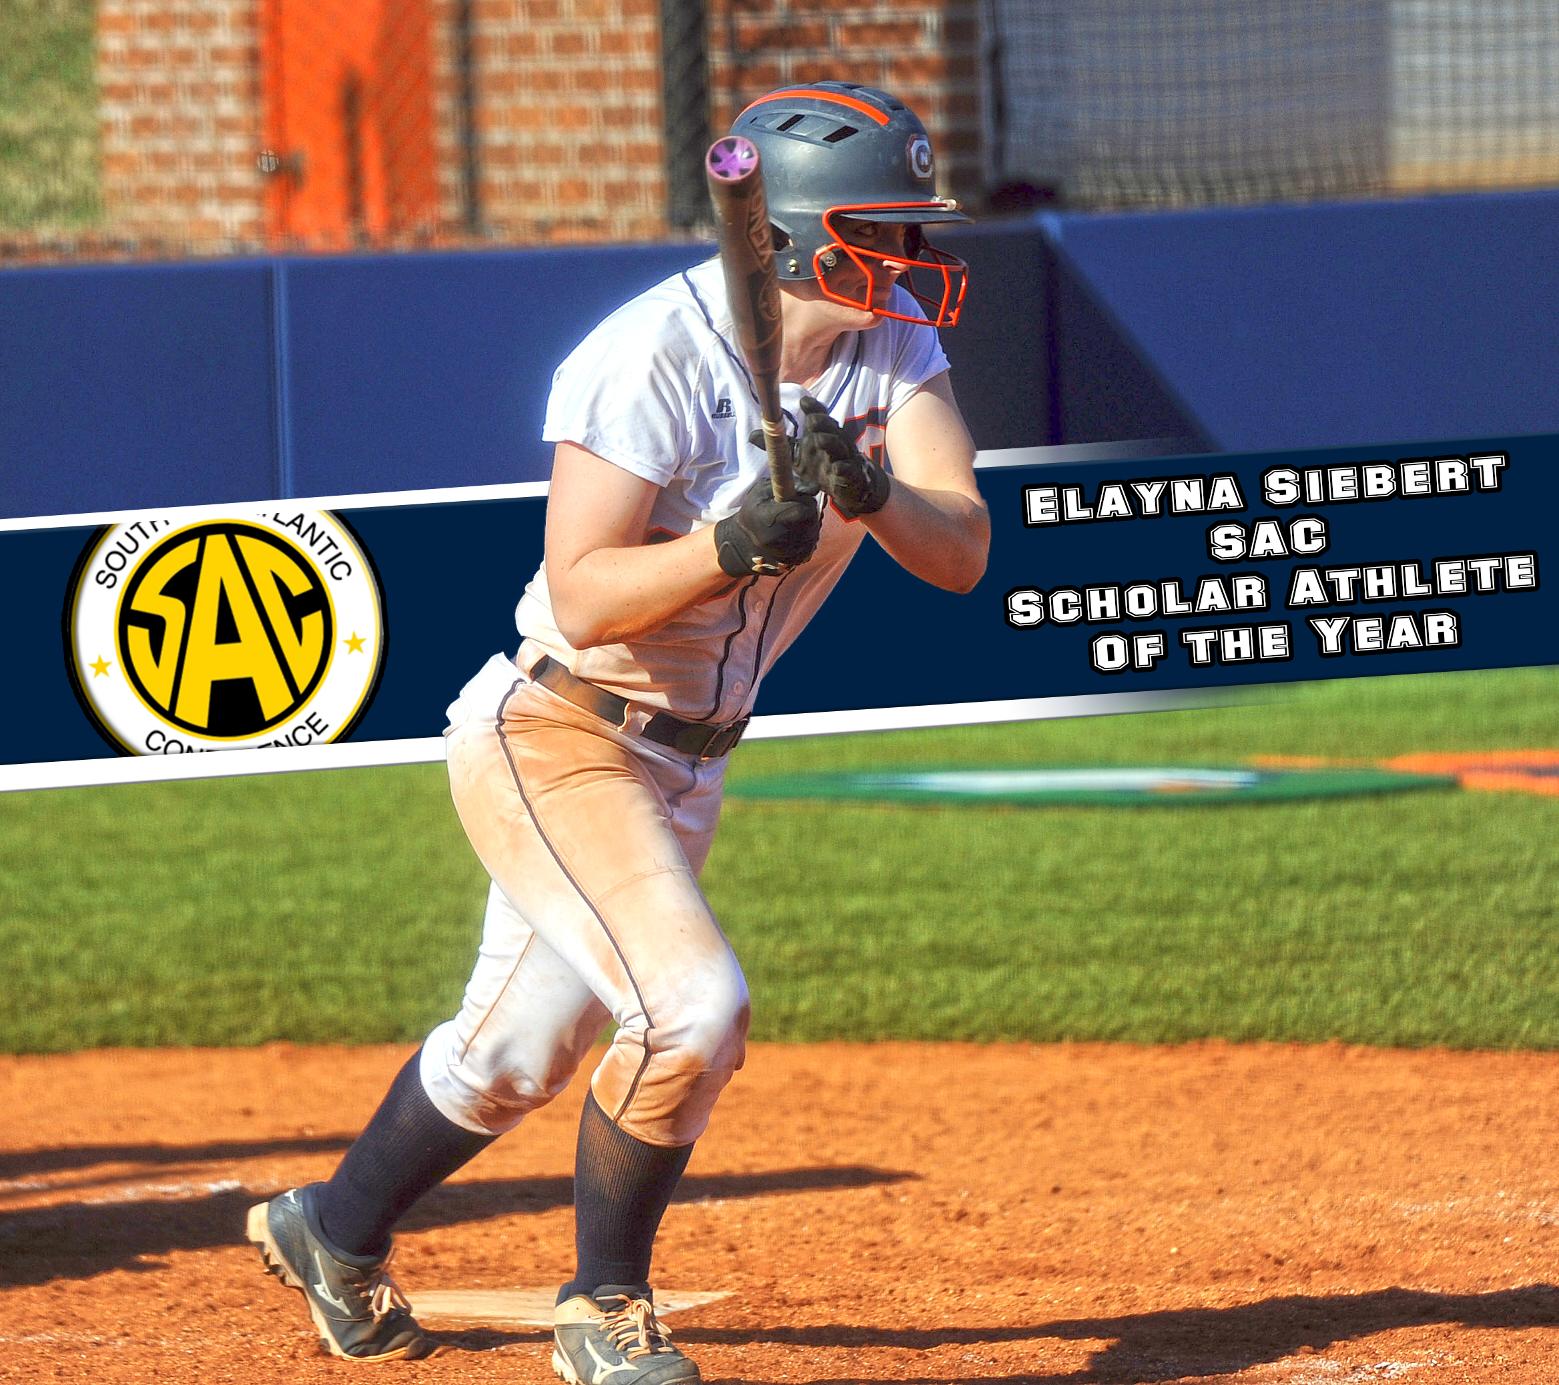 Siebert named South Atlantic Conference Scholar Athlete of the Year